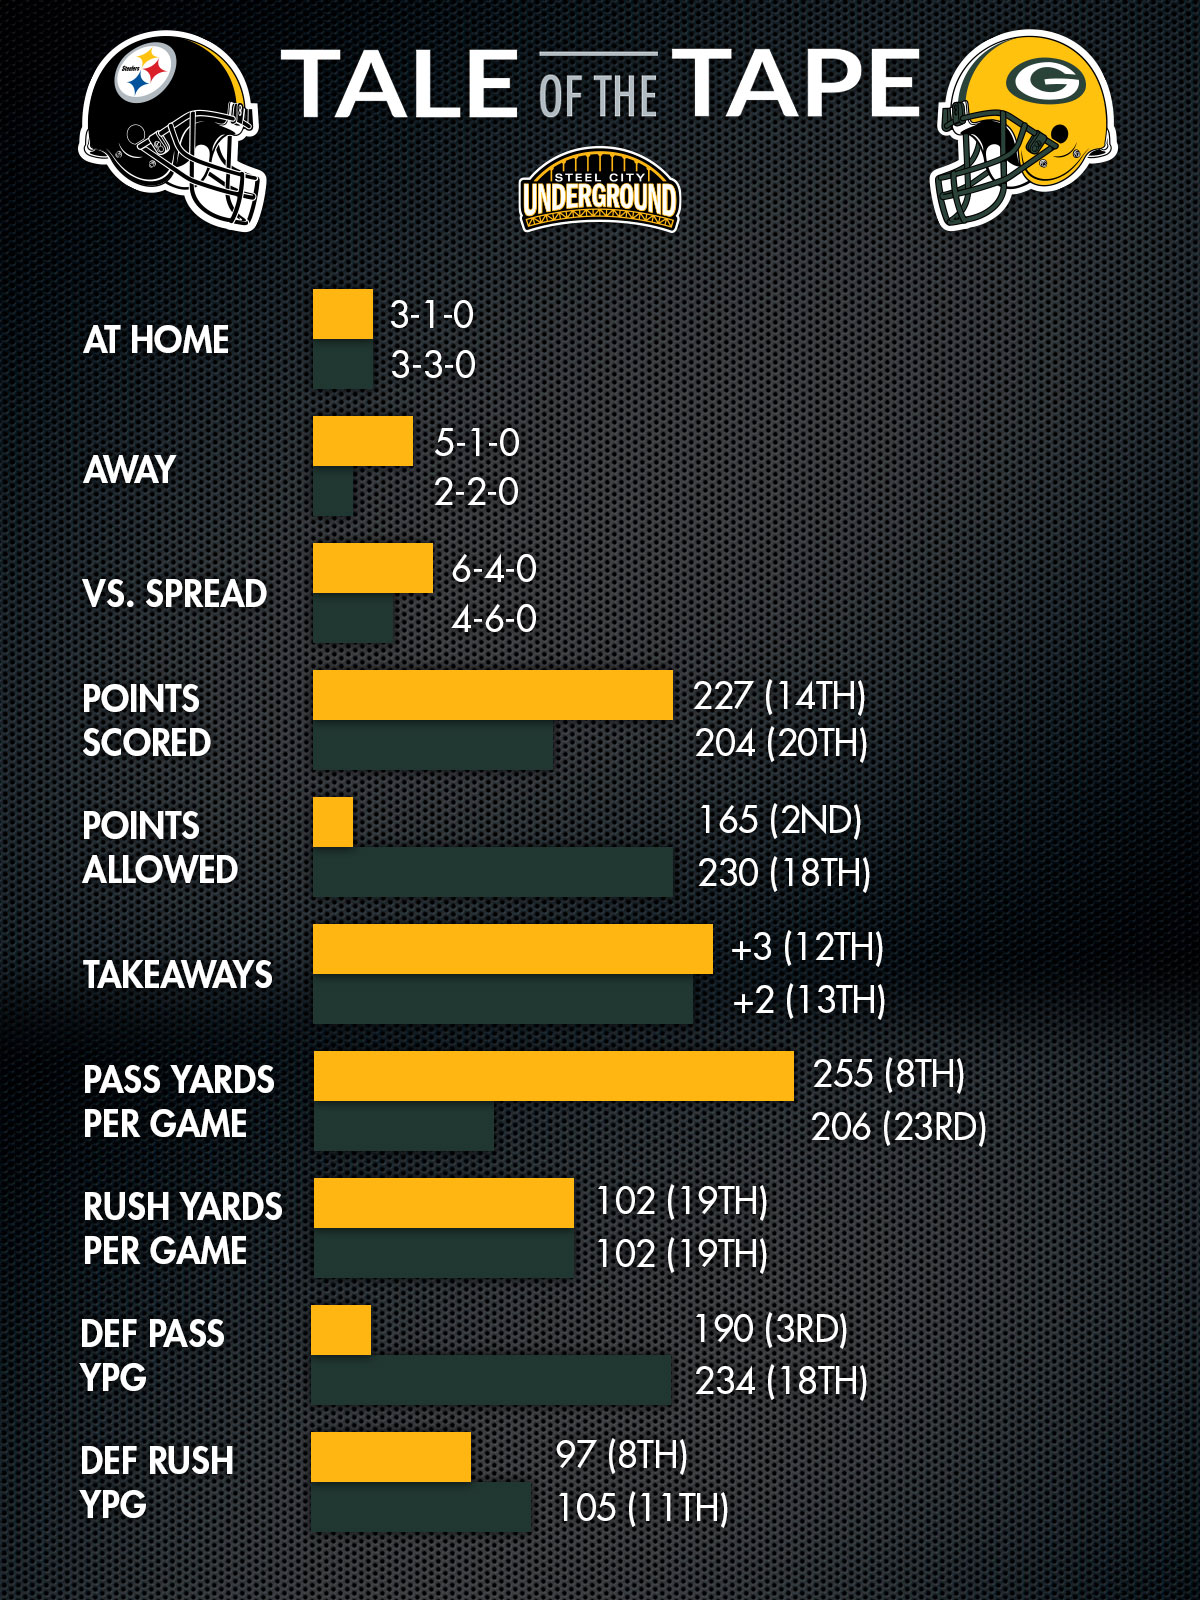 Steelers vs. Packers Tale of the Tape